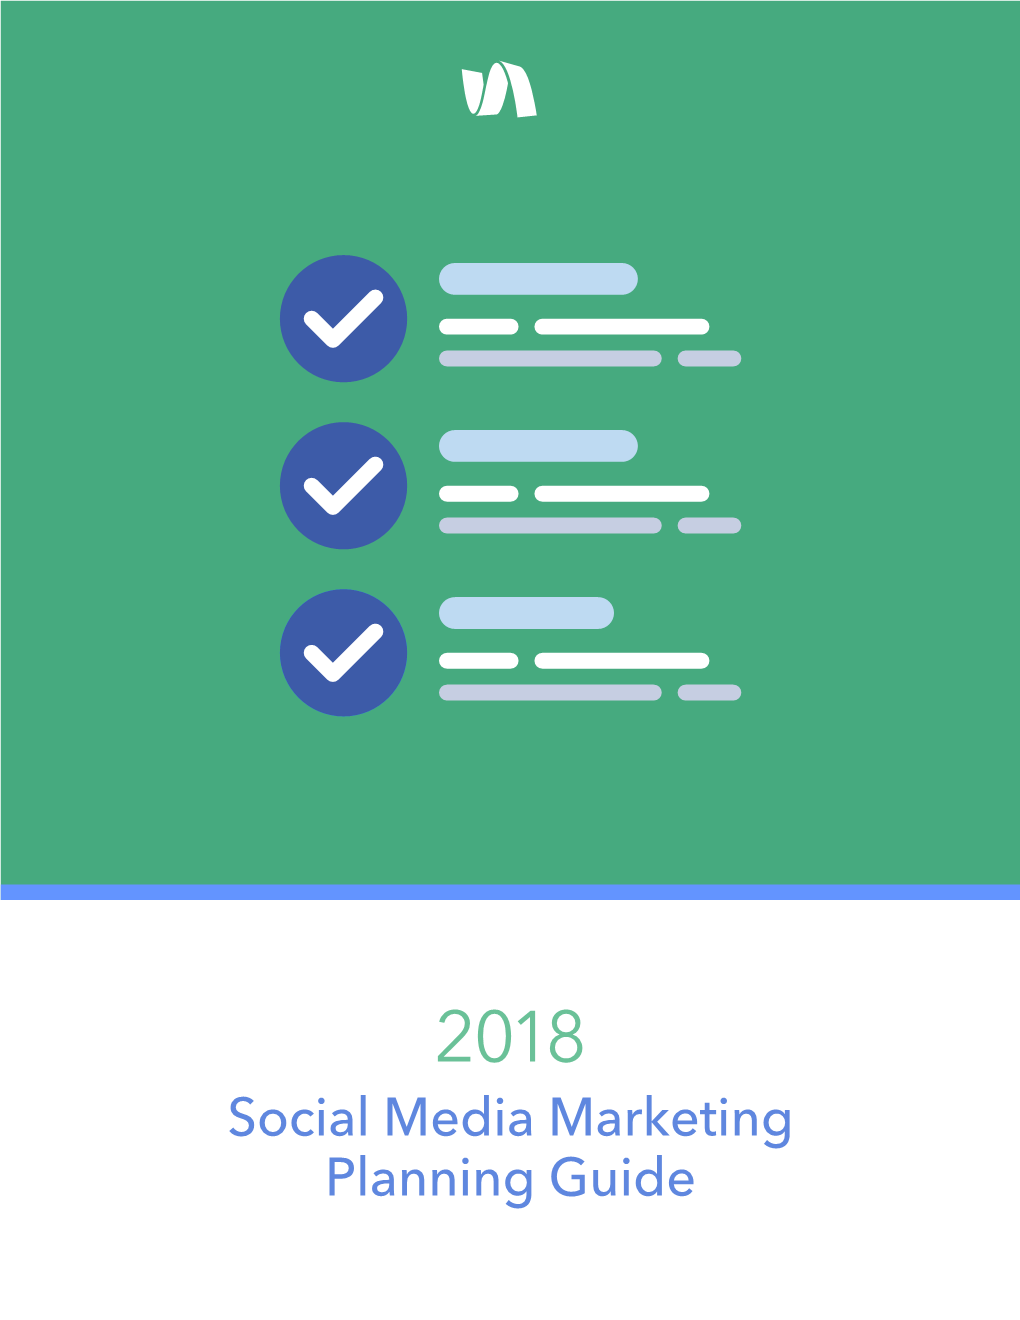 Social Media Marketing Planning Guide Introduction